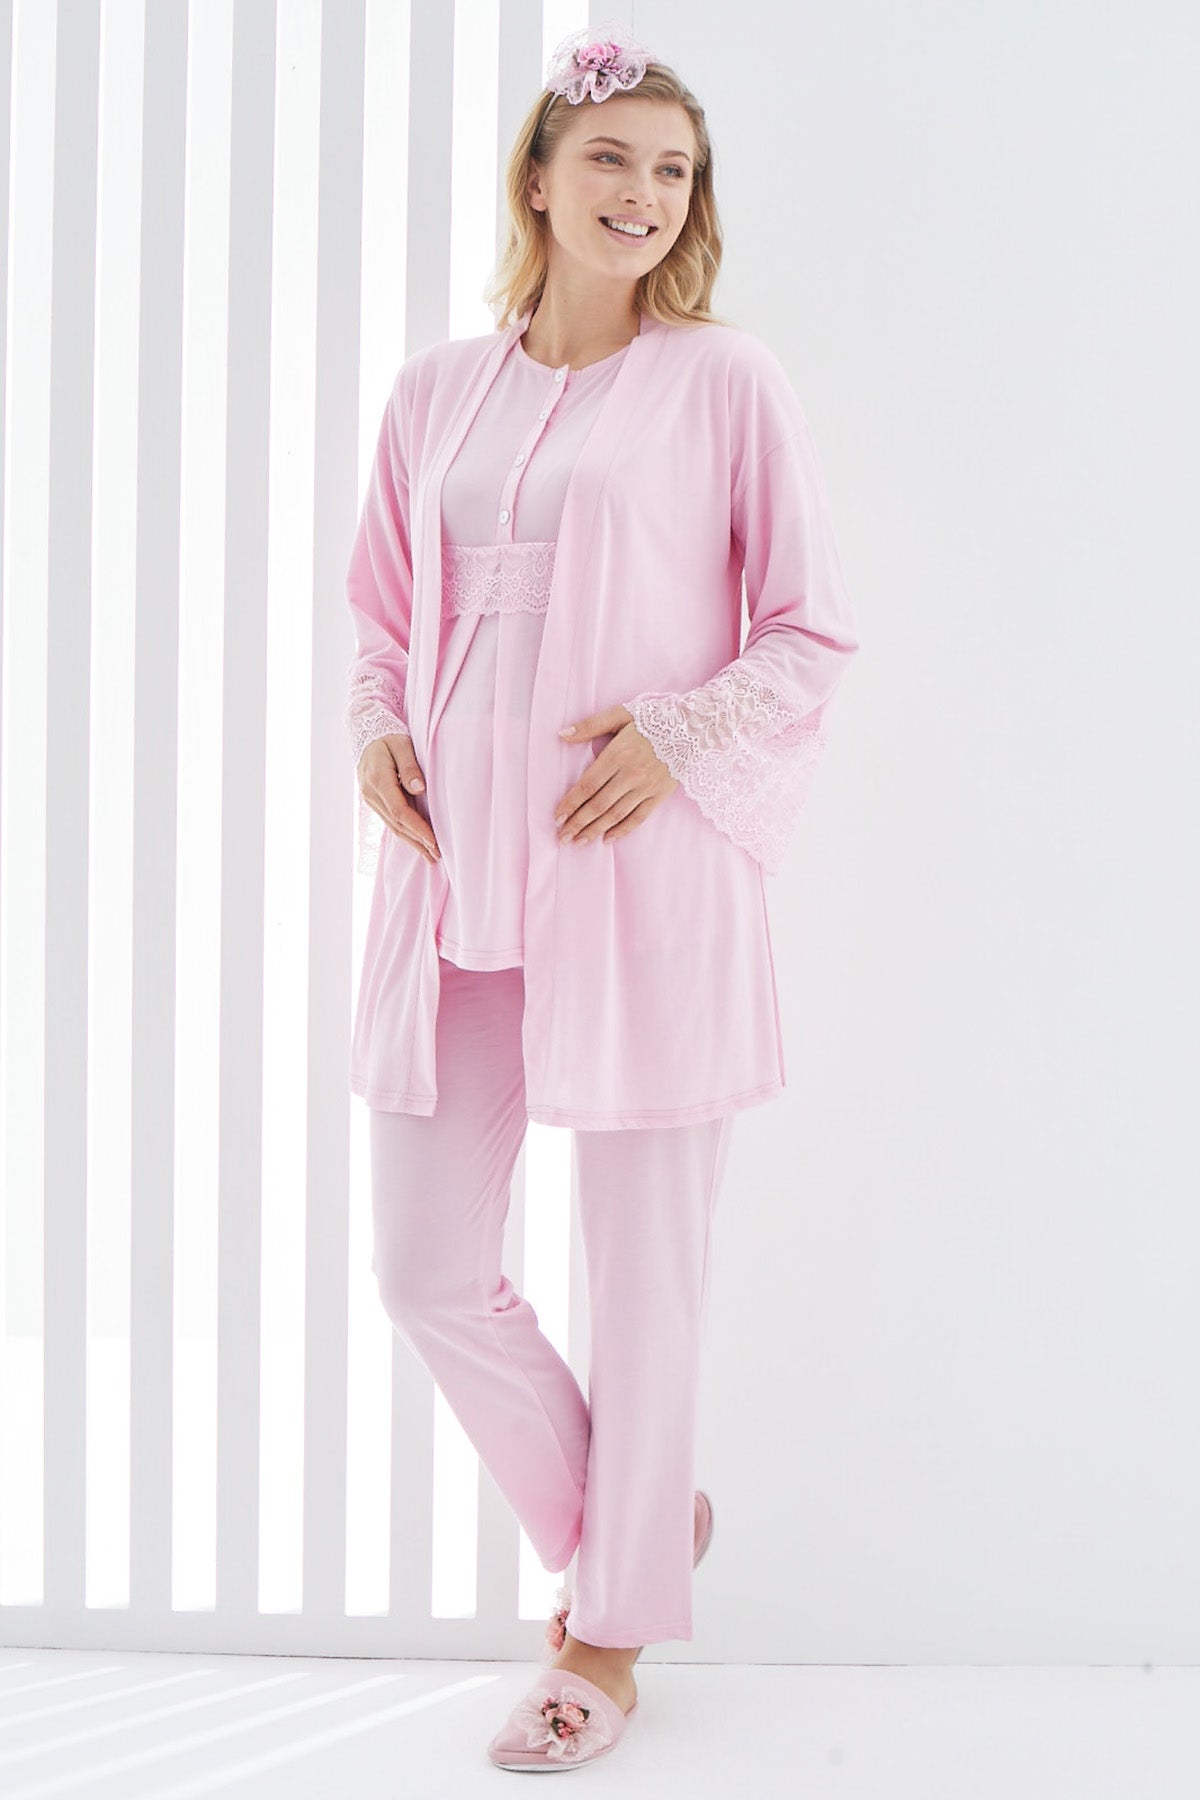 Shopymommy 3412 Lace 3-Pieces Maternity & Nursing Pajamas With Lace Flywheel Arm Robe Pink